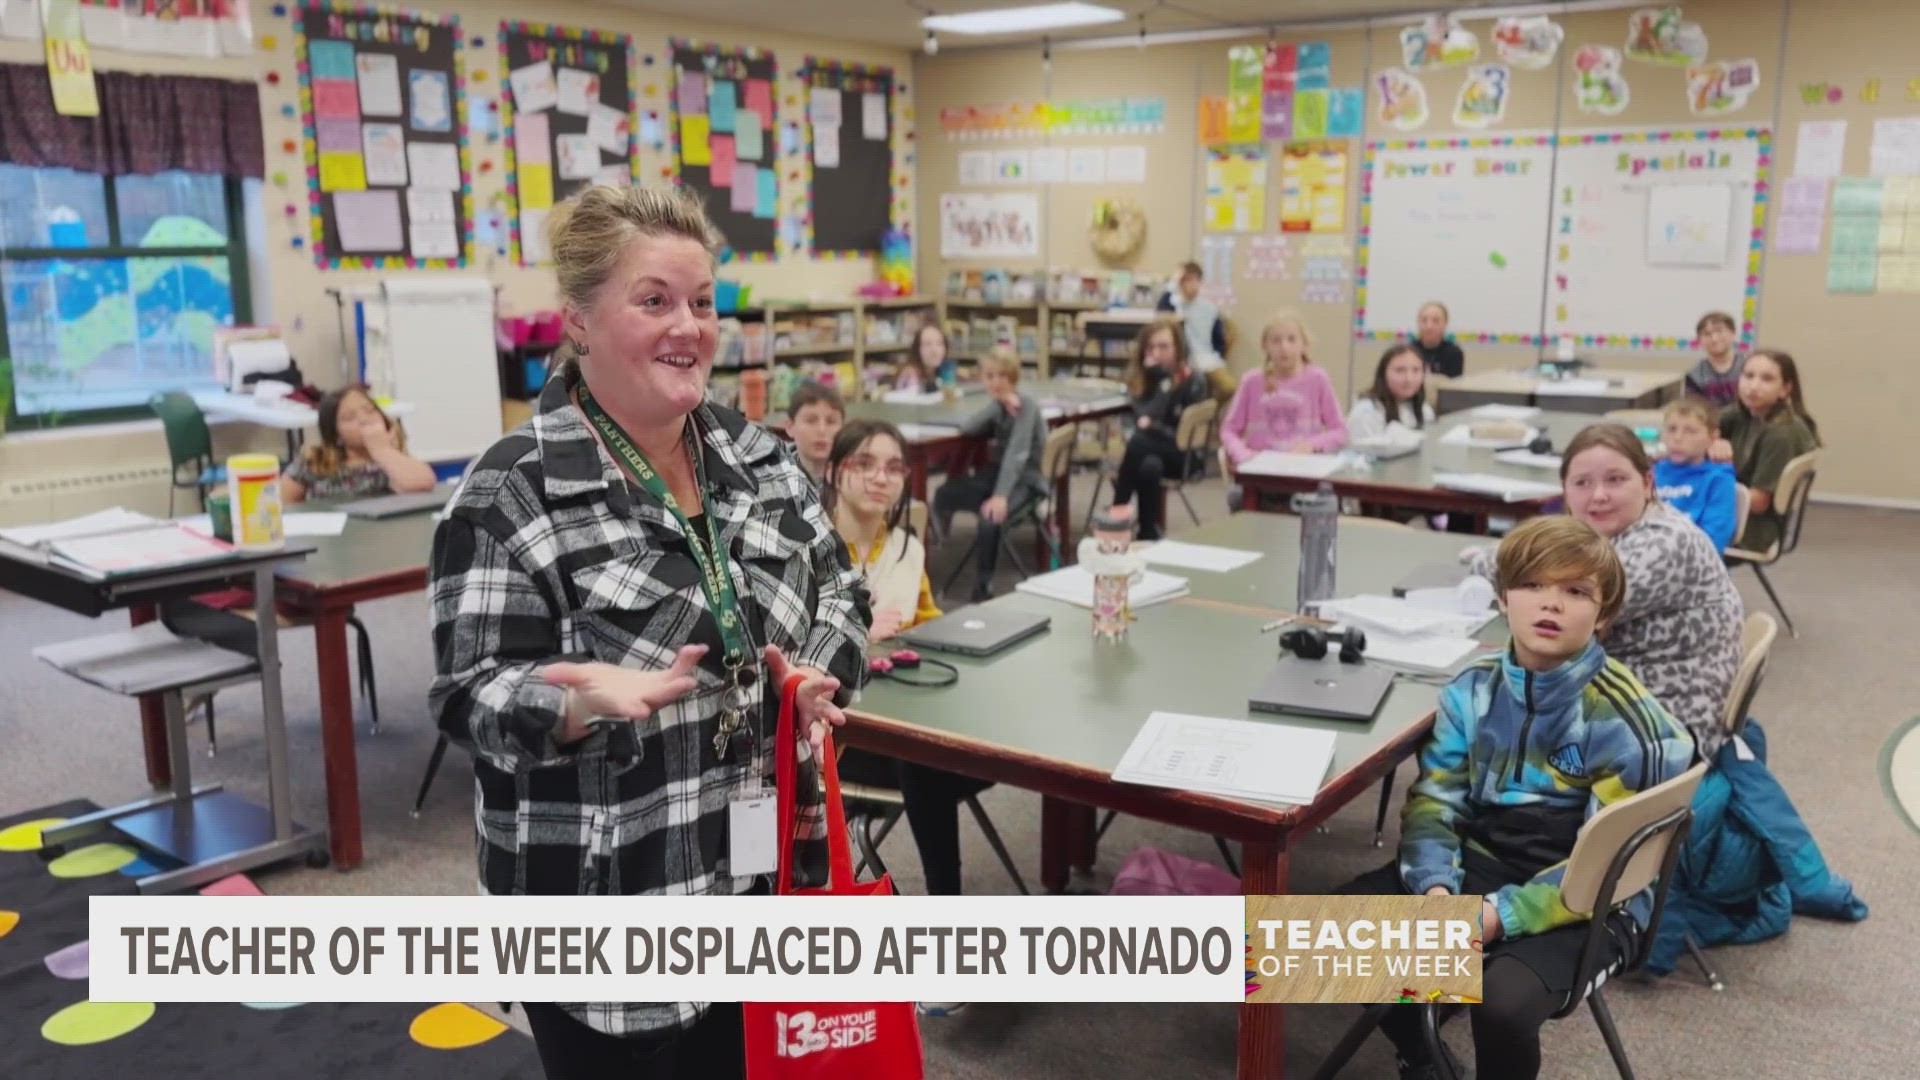 Lisa Czypera has had a rough go this last school year, losing her home in a tornado. Those challenges haven’t stopped this educator from showing up for her students.